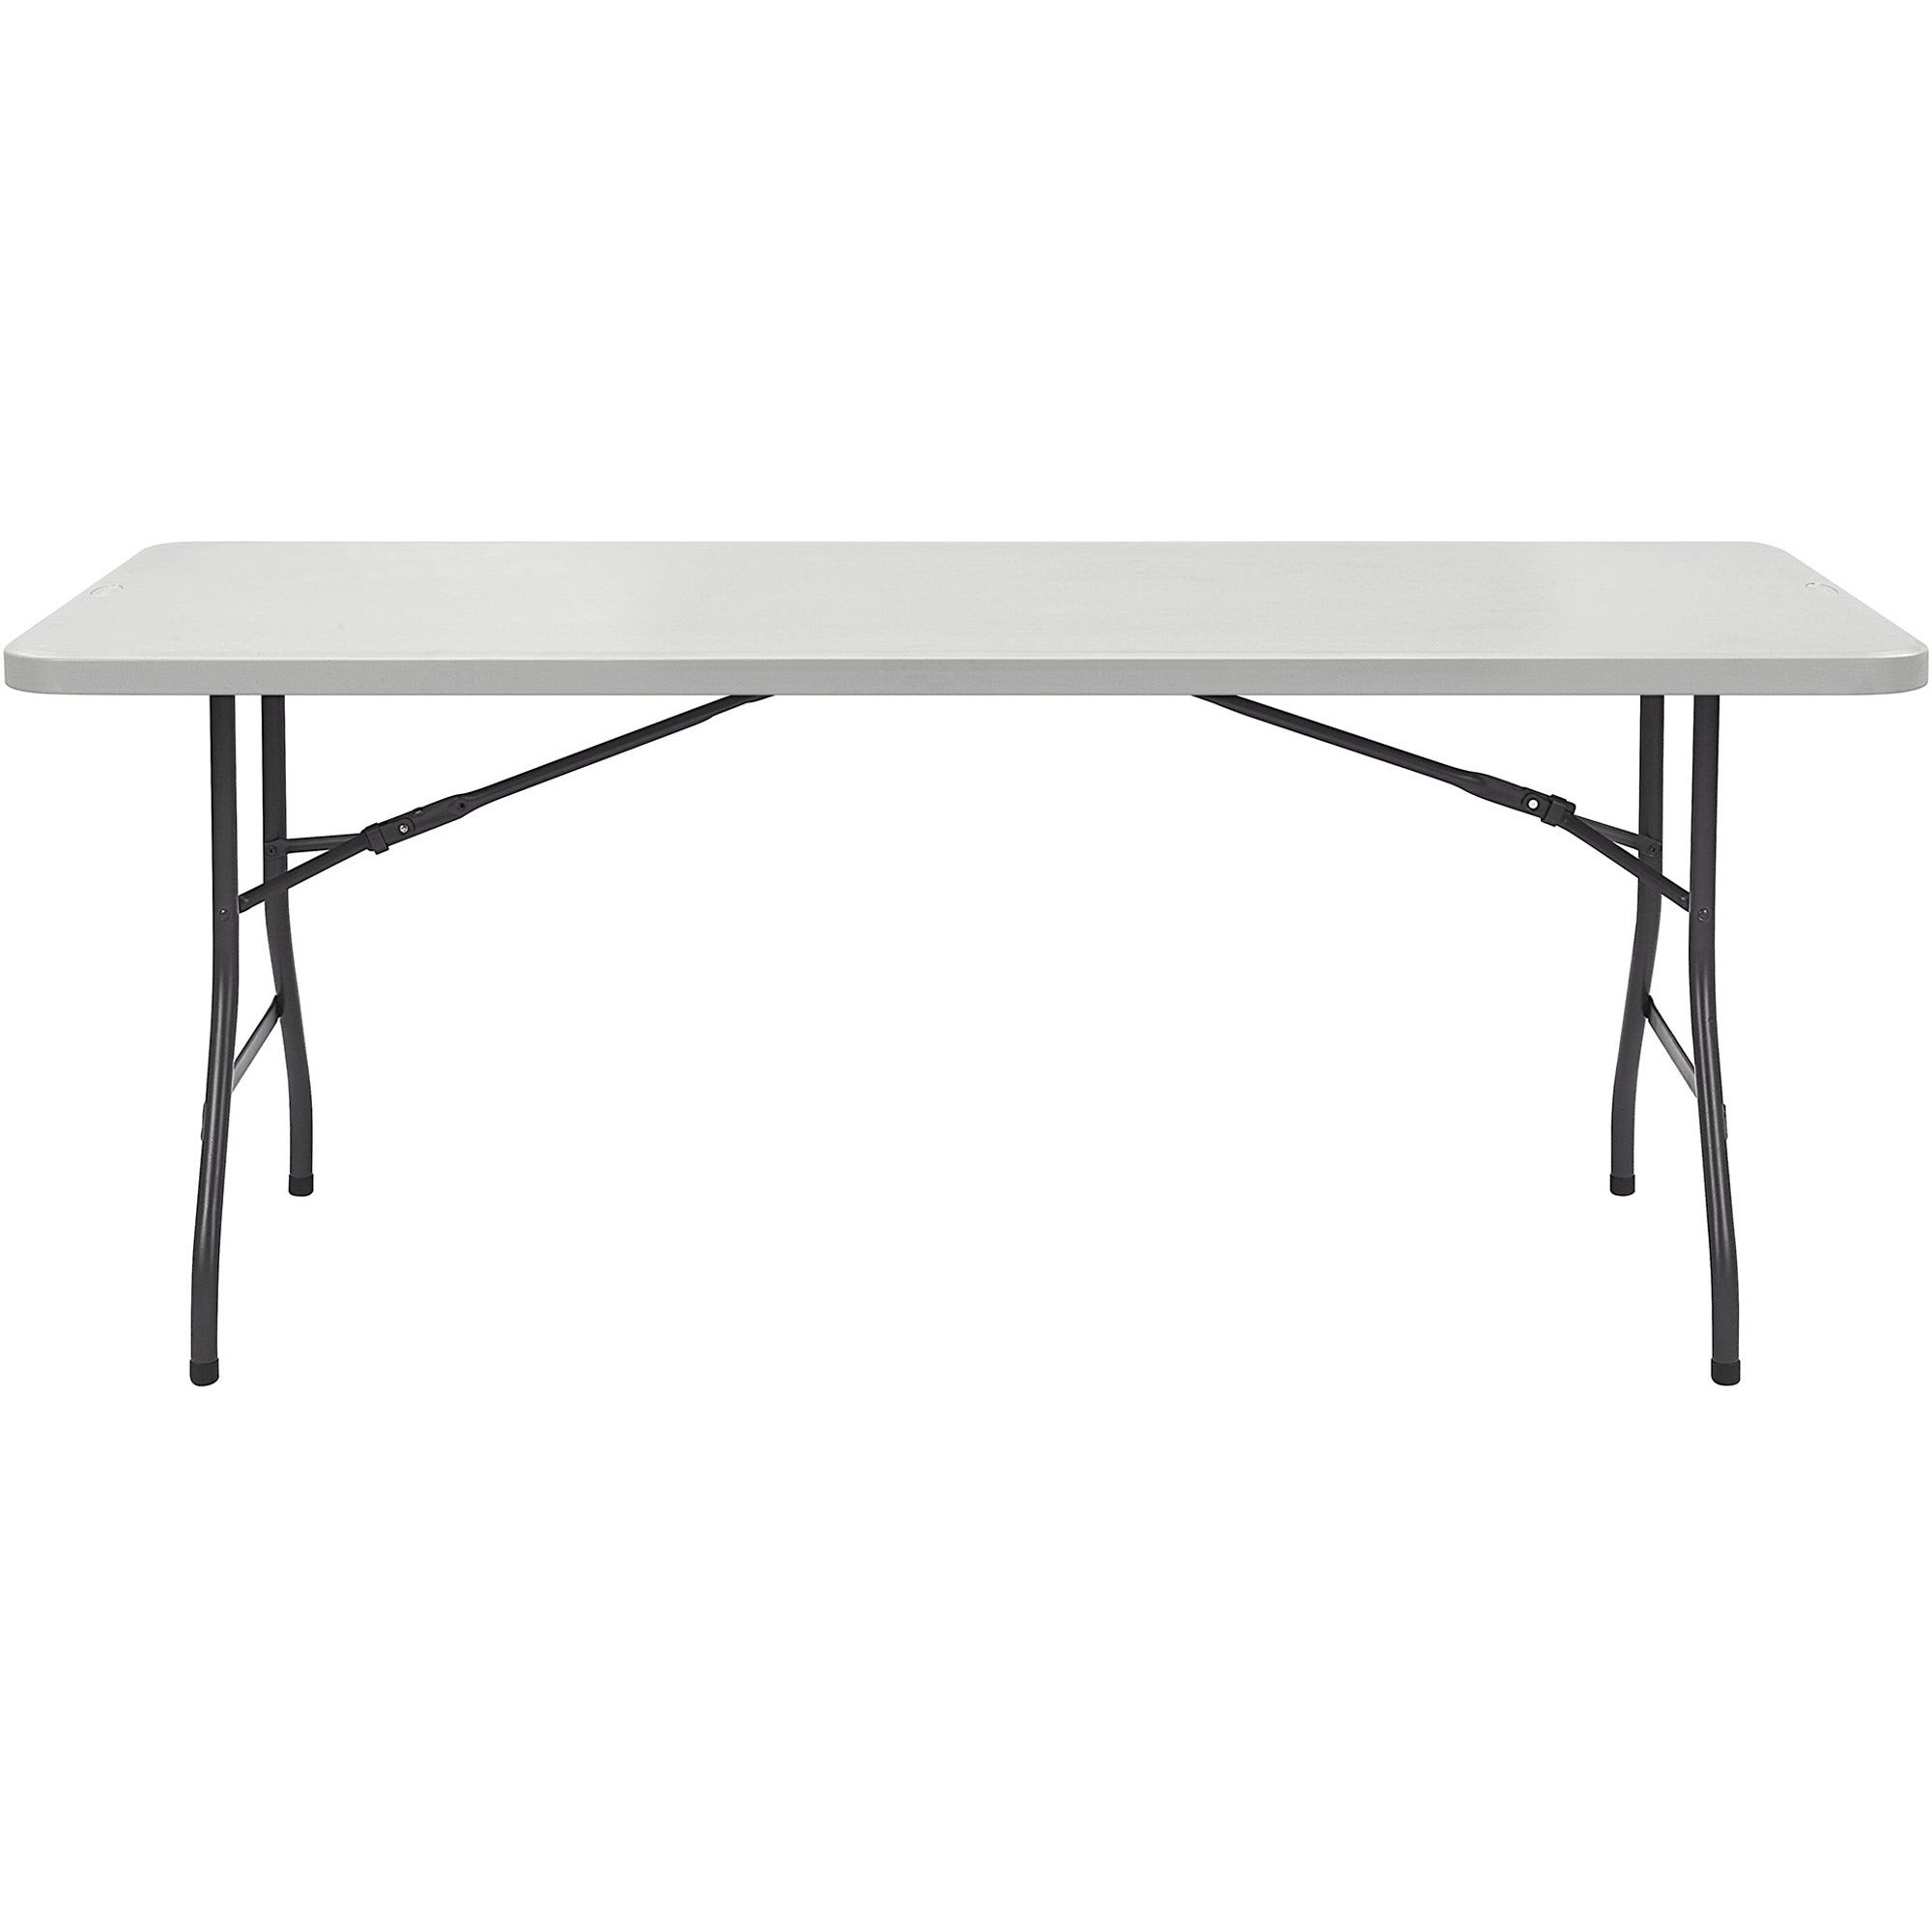 lorell-ultra-lite-banquet-table-for-table-toplight-gray-rectangle-top-dark-gray-folding-base-600-lb-capacity-x-60-table-top-width-x-30-table-top-depth-x-2-table-top-thickness-29-height-gray-1-each_llr66656 - 3